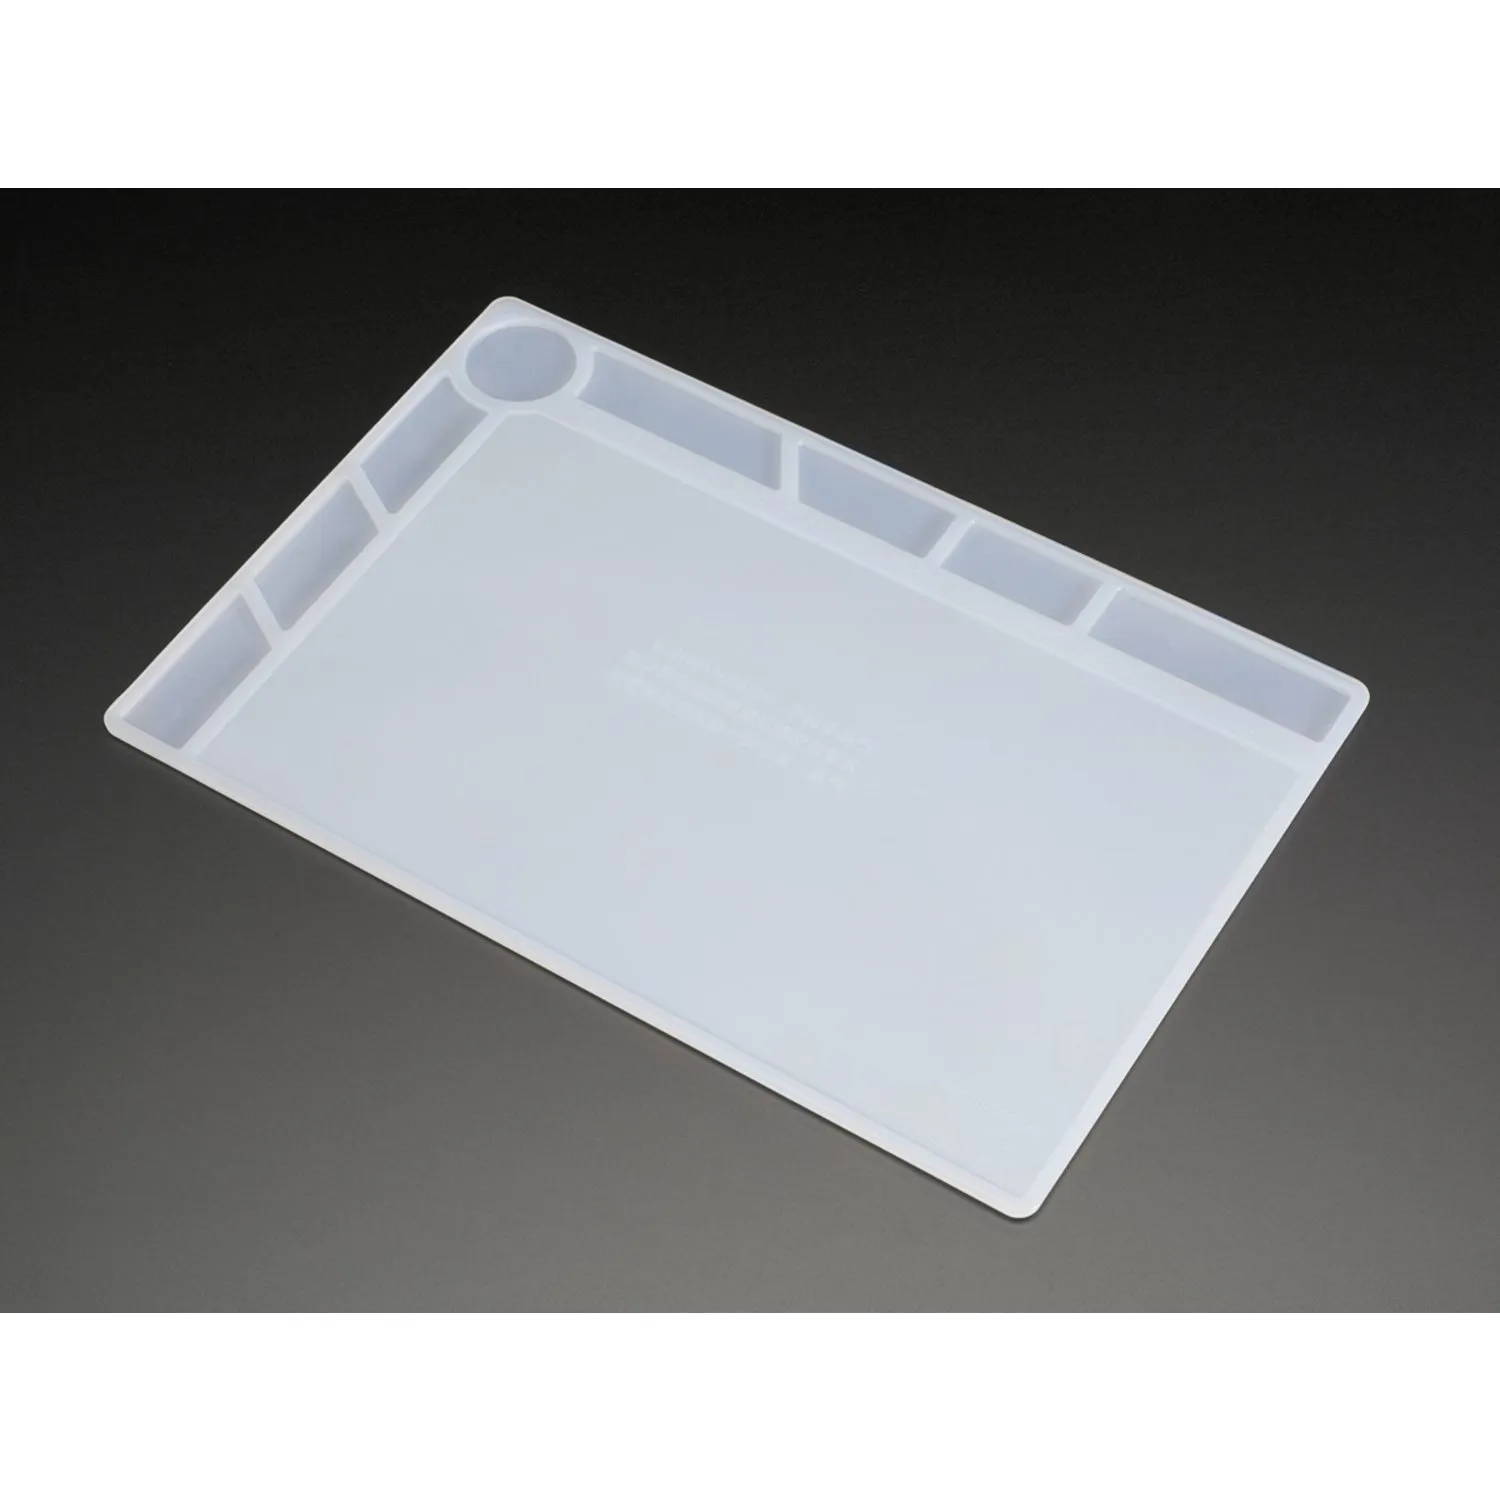 Photo of Insulated Silicone Rework Mat - 34cm x 23cm x 4mm Work Surface